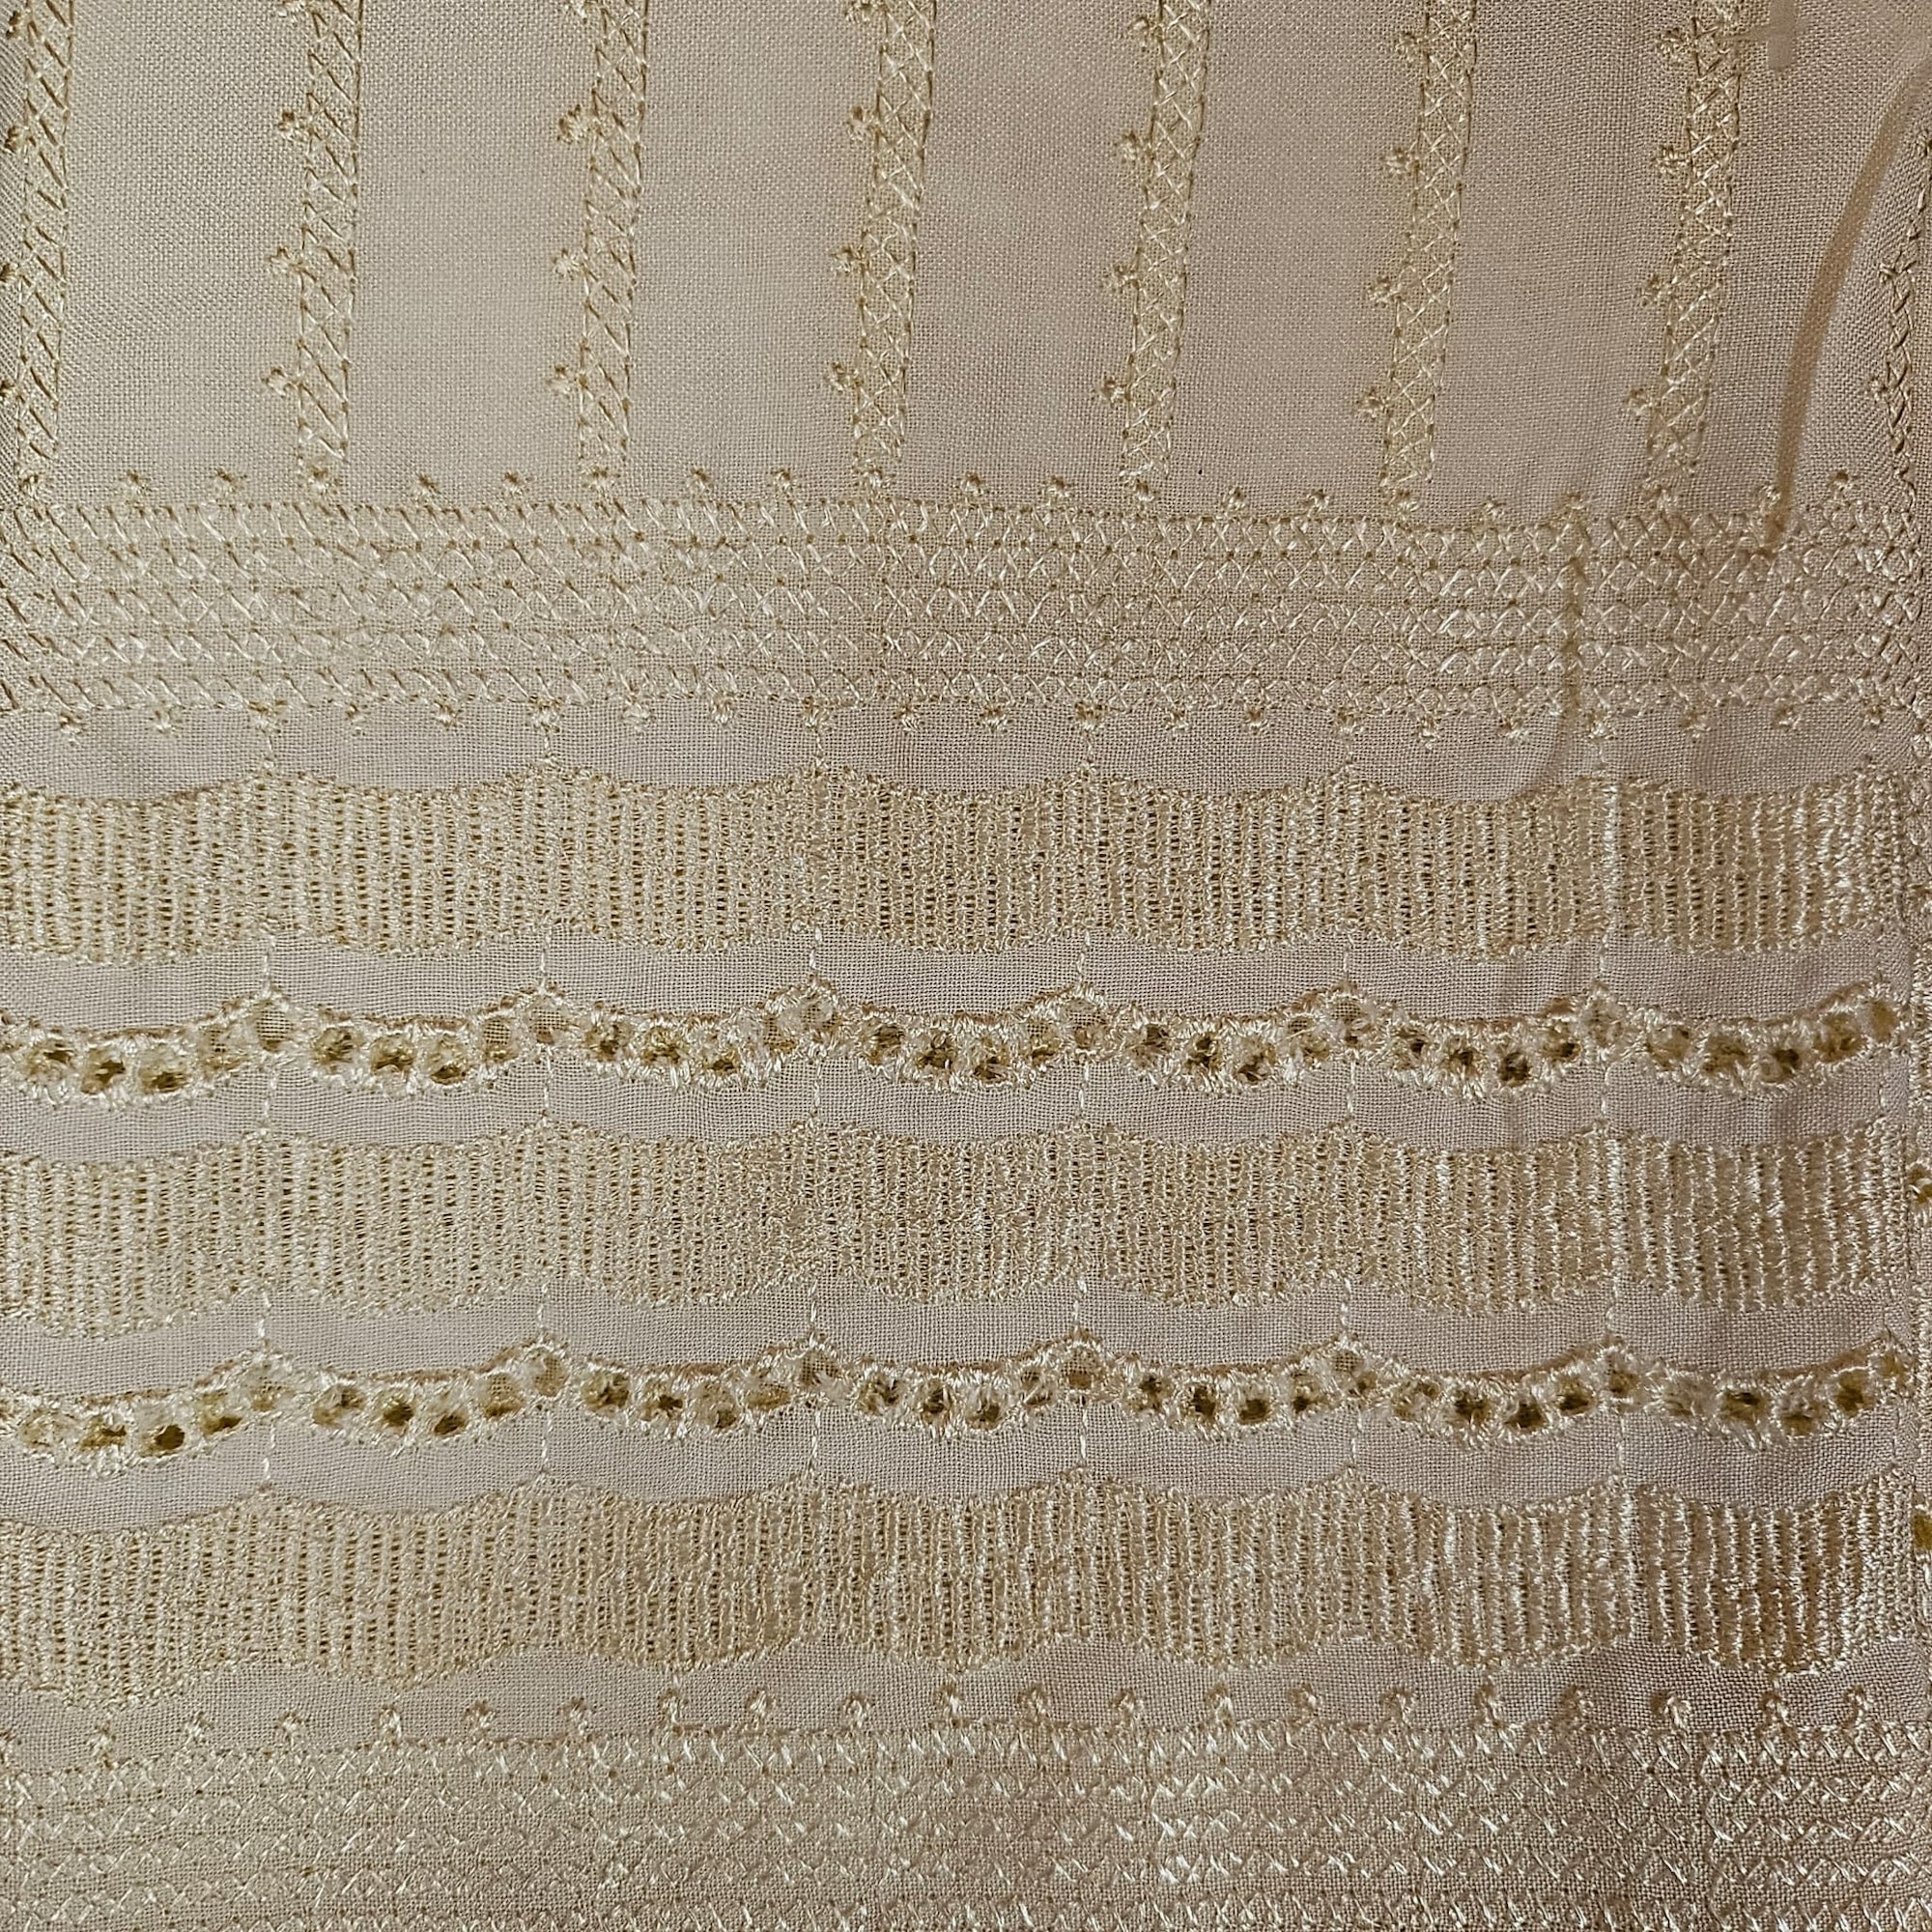 Embroidered Palazzo Pants-Neutrals - Vintage India NYC